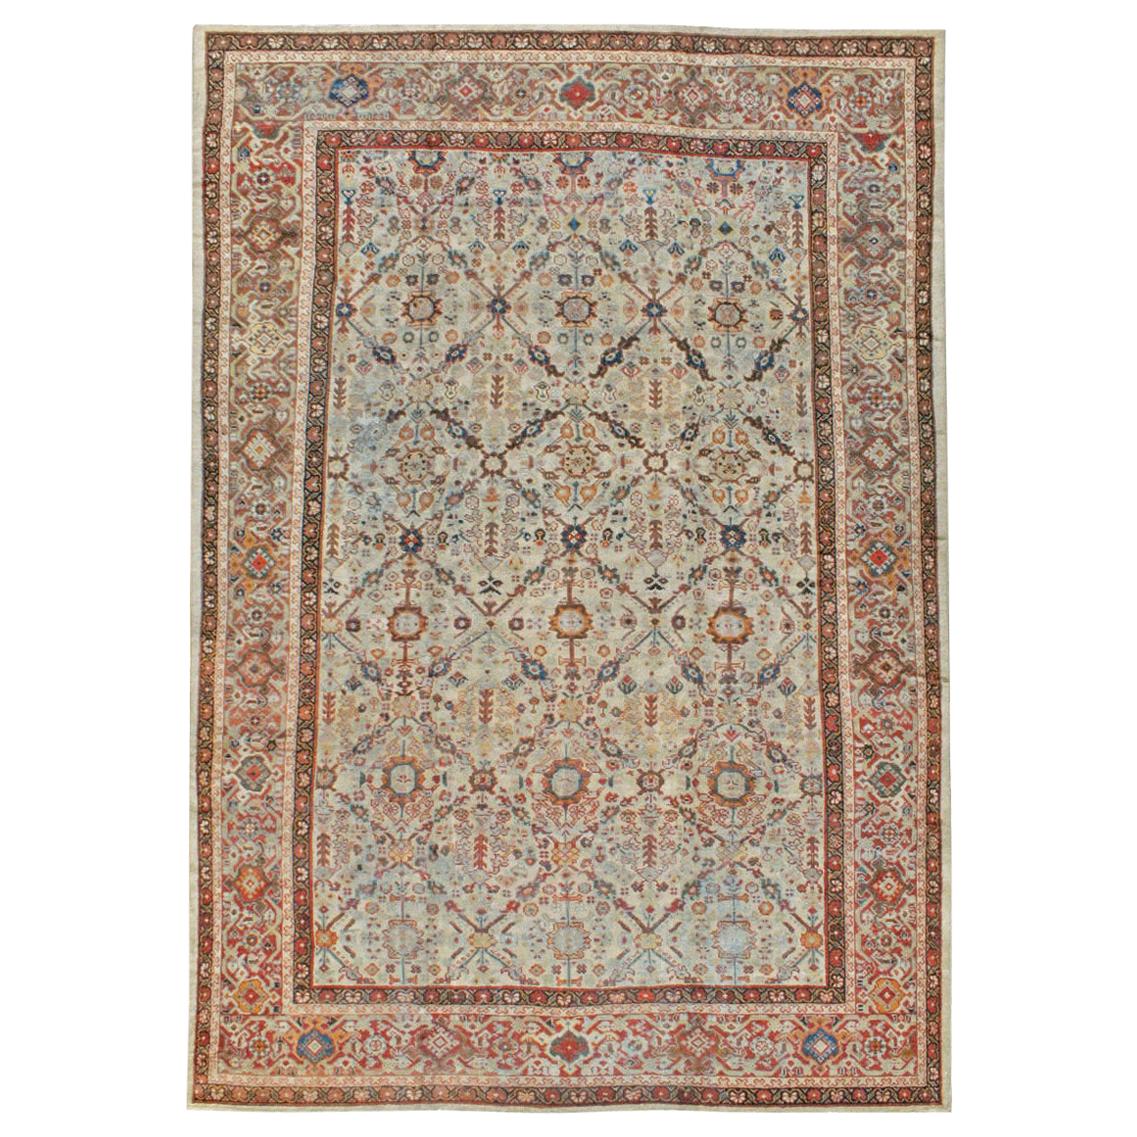 Early 20th Century Handmade Persian Room Size Rug in Light Grey, Beige, and Rust